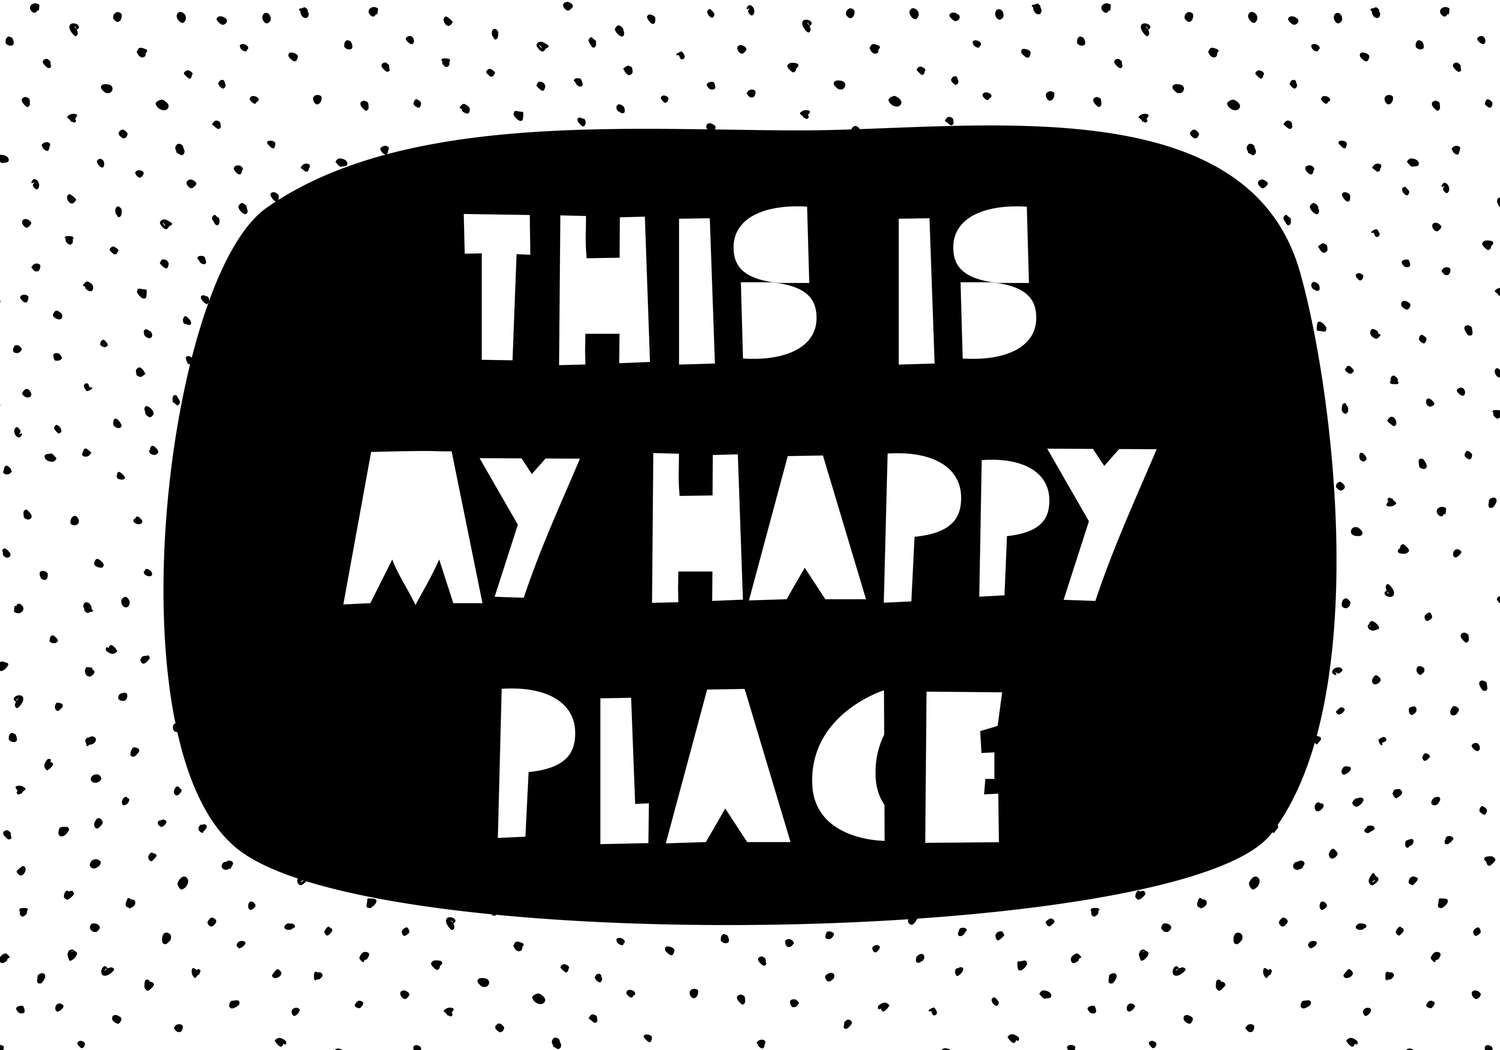             Photo wallpaper for children's room with lettering "This is my happy place" - Smooth & slightly glossy non-woven
        